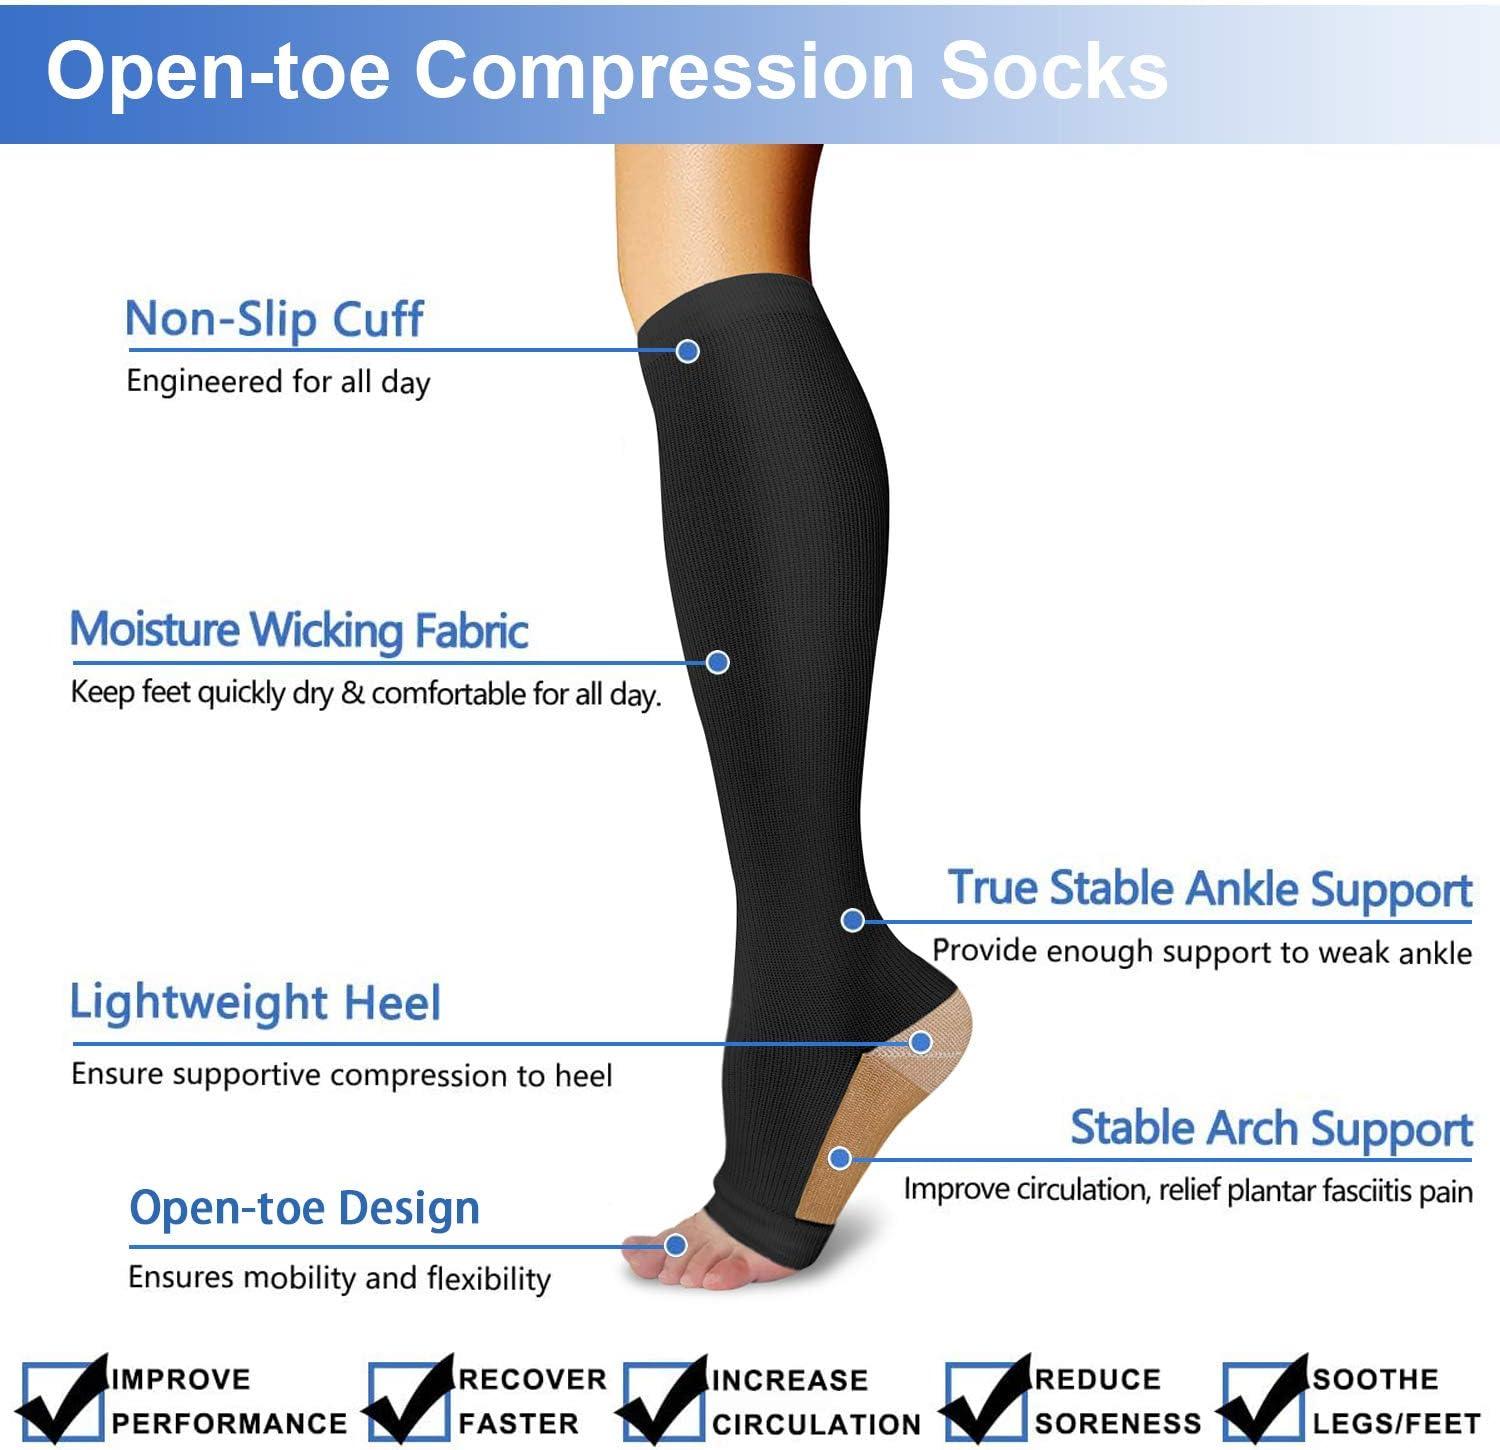 Athbavib 3 Pairs Zipper Compression Socks, 15-20 mmHg Closed Toe Compression  Stocking with Zipper for